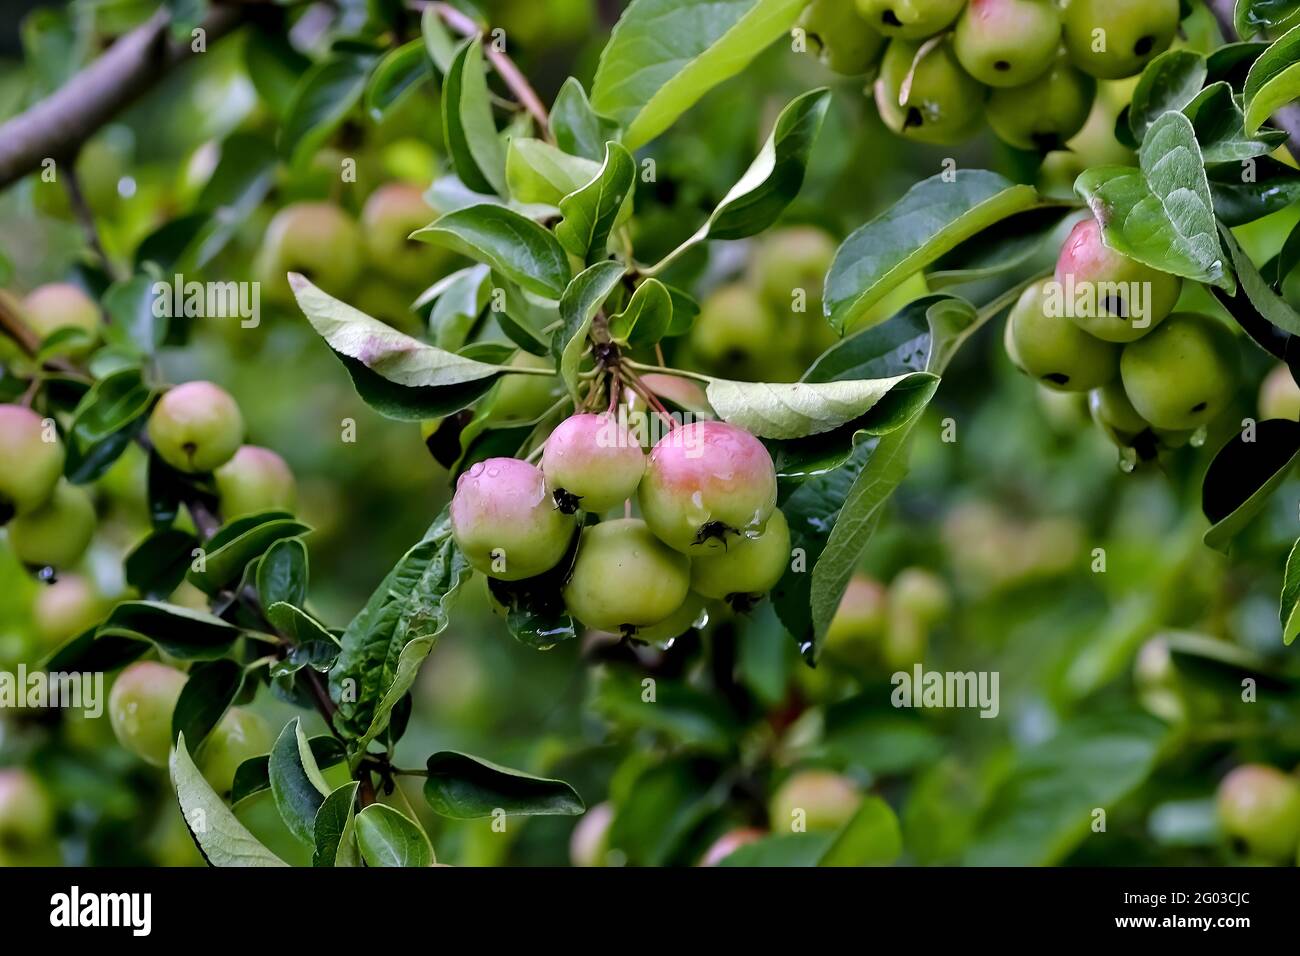 Very many red fruits of a grabapple named 'Butterball' (Malus x zumi) ripe on the branches after a rain in summer, Bavaria, Germany Stock Photo